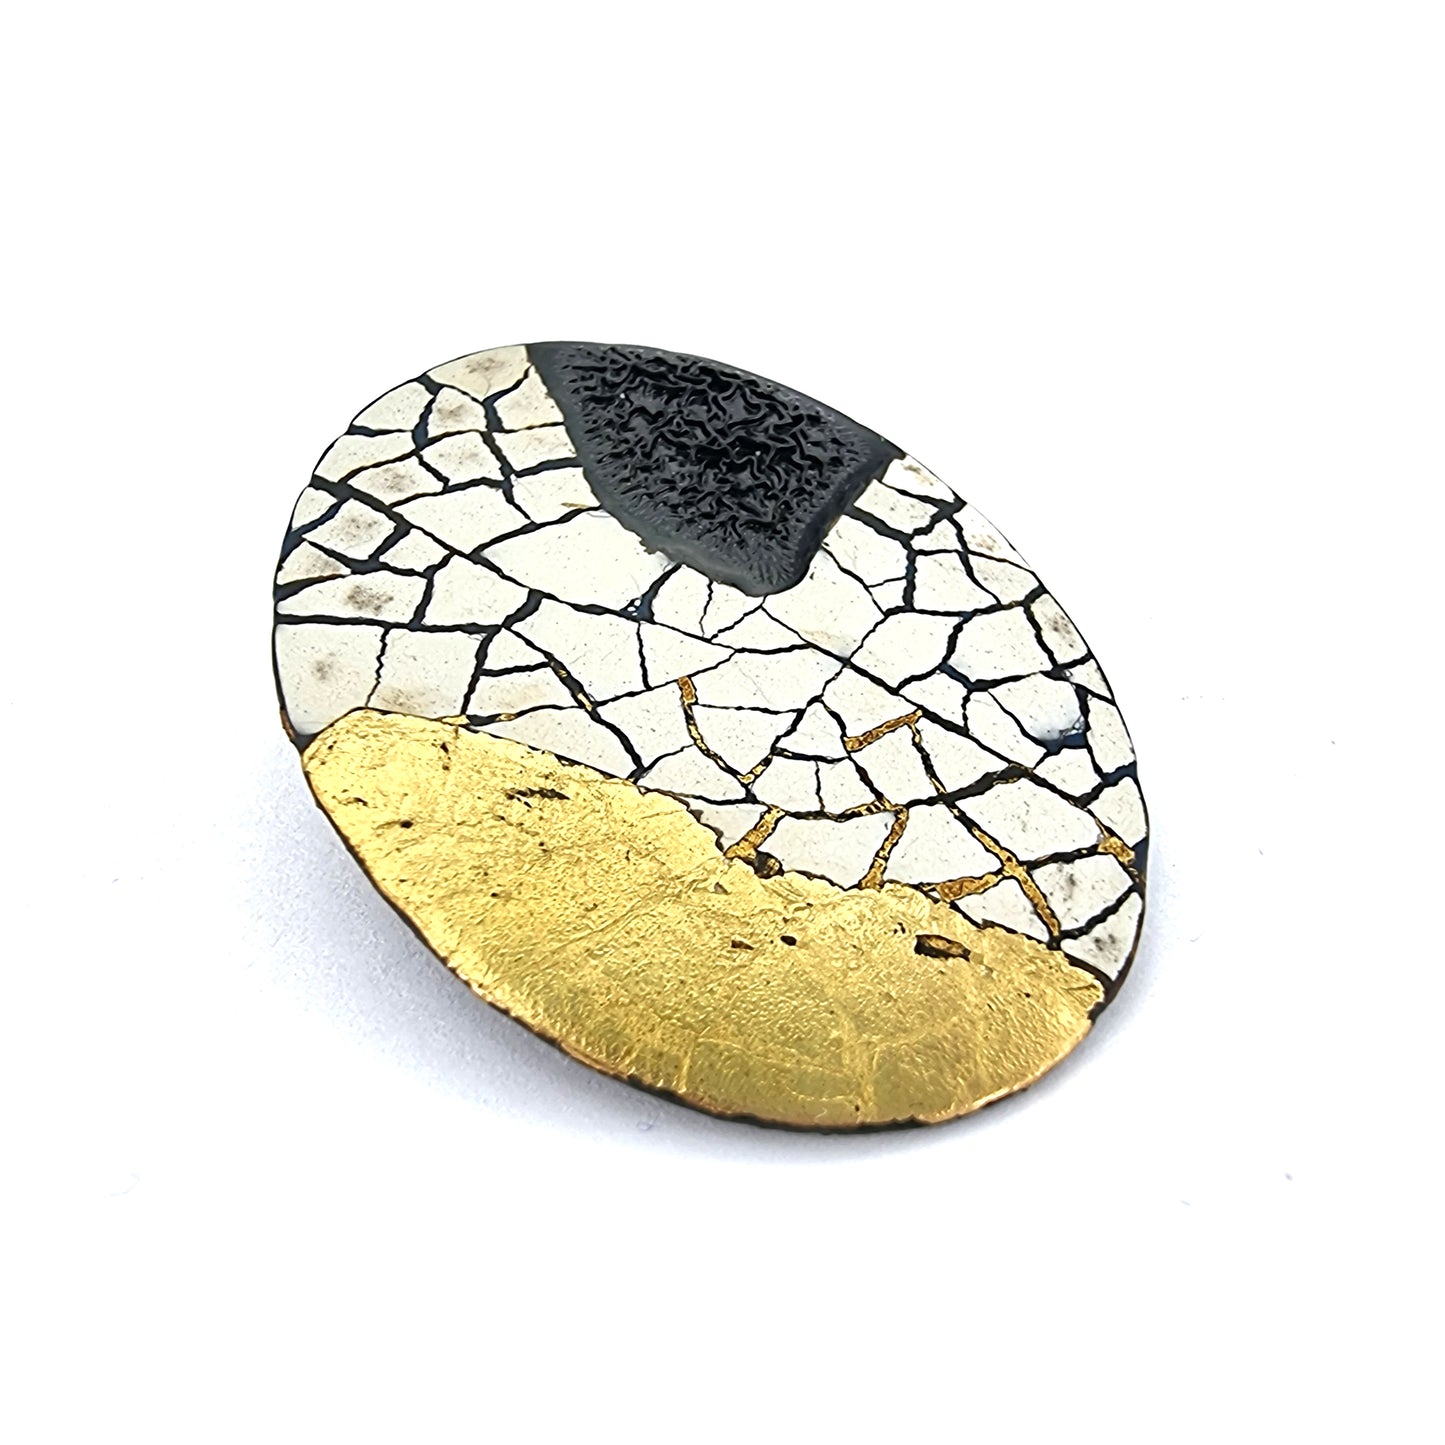 Maxi Modern Mosaic Oval statement earrings with 22k gold leaf